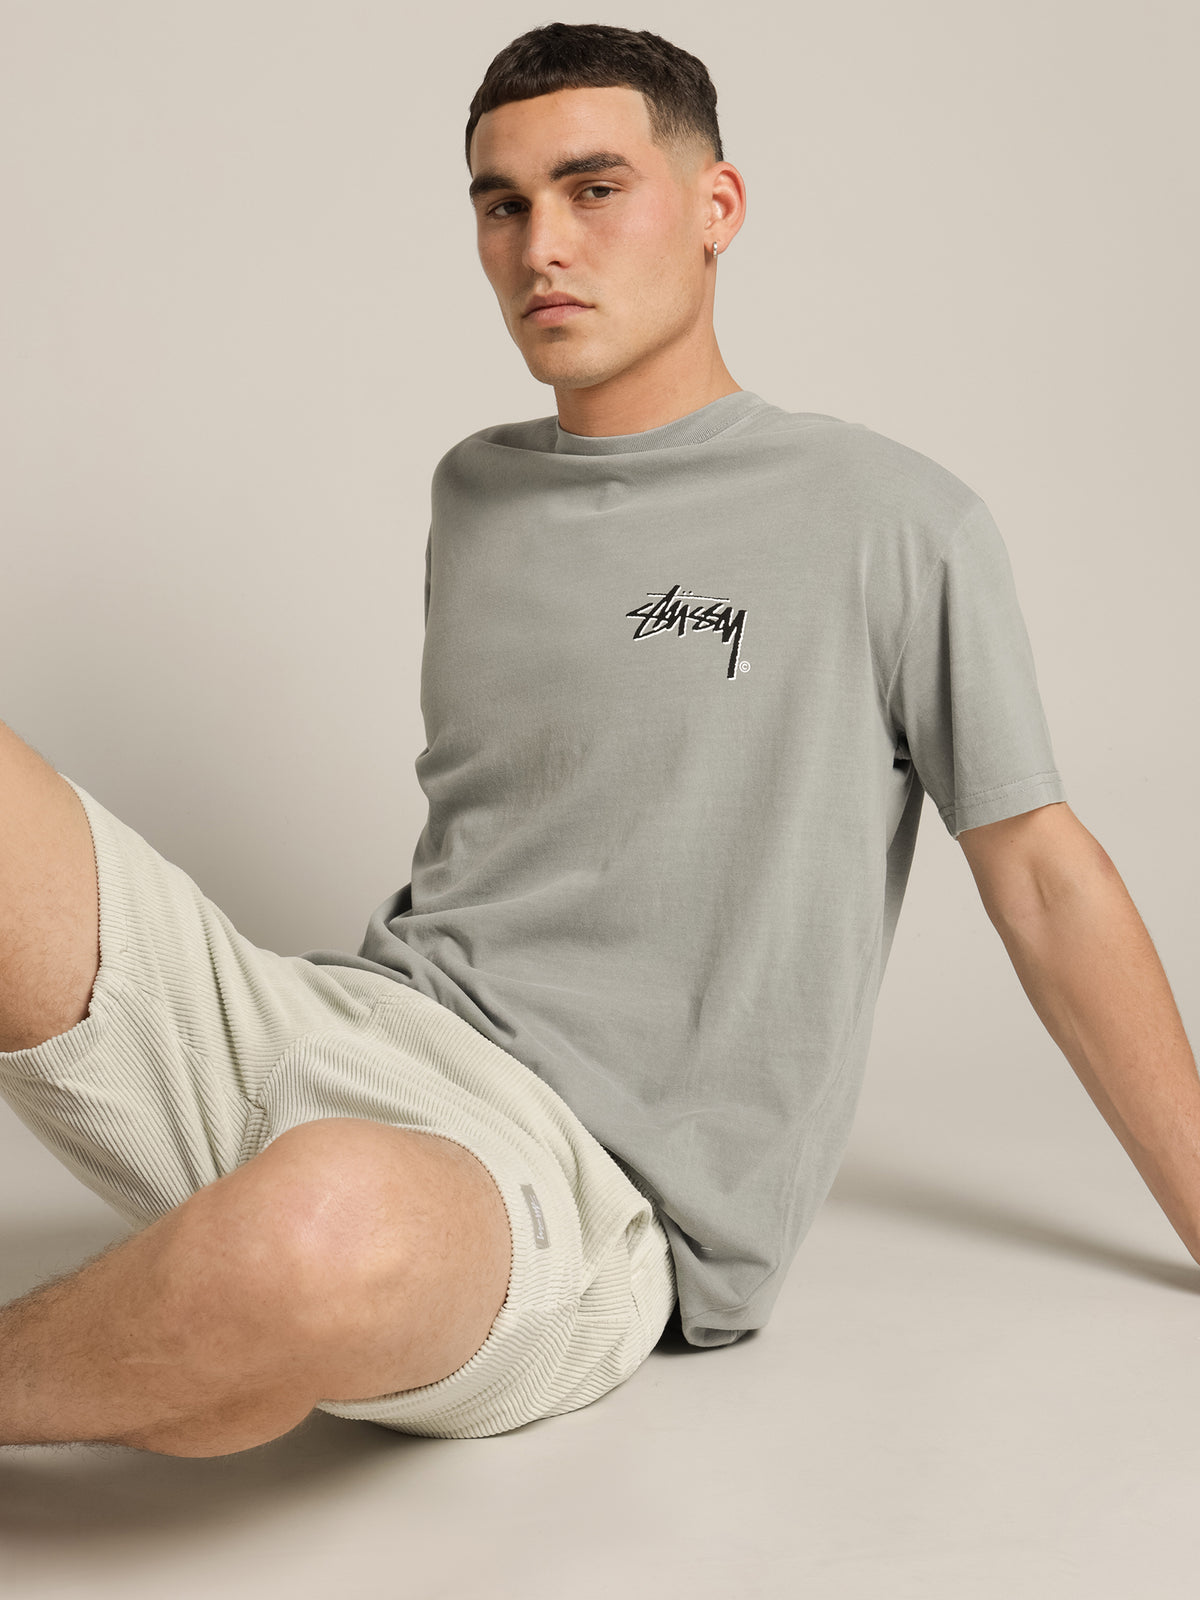 Shadow Stock T-Shirt in Pale Grey